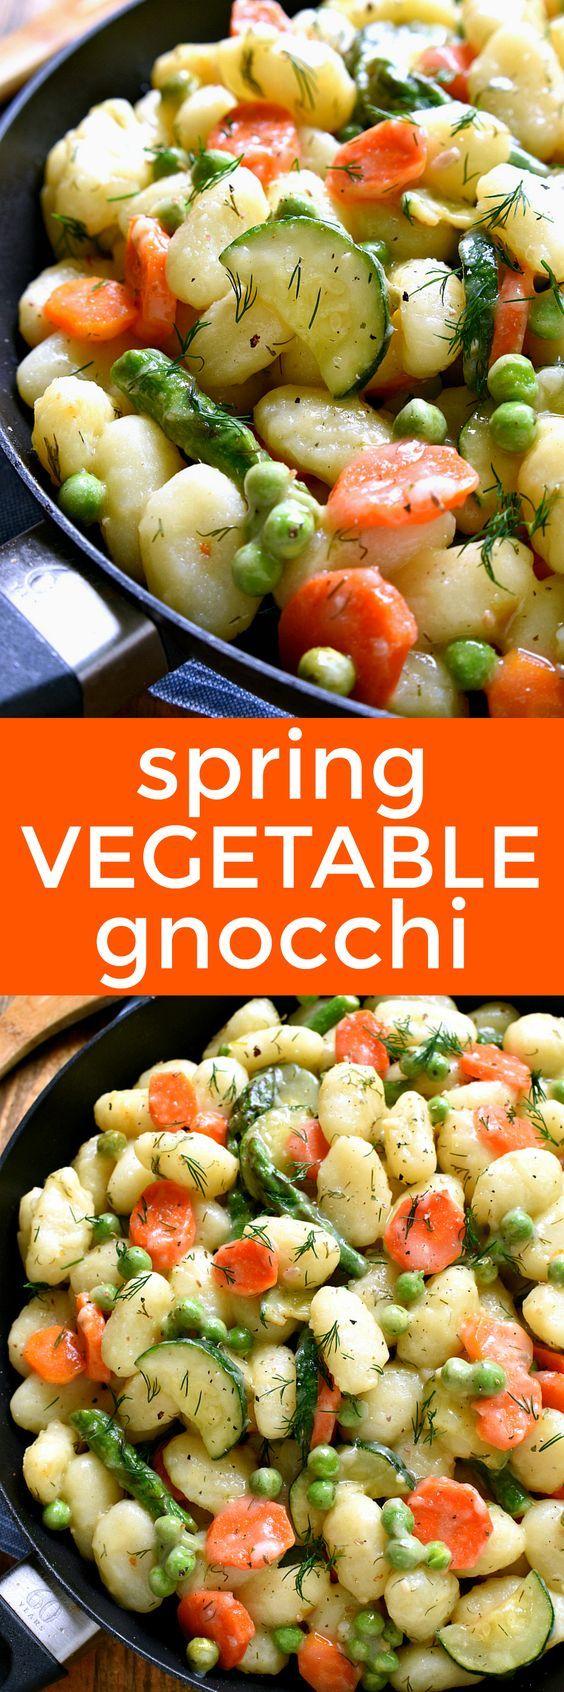 This Spring Vegetable Gnocchi is creamy, delicious, and perfect for spring! It's loaded with the BEST spring vegetables and comes together in under 20 minutes. Perfect for busy weeknights....and believe it or not, it's dairy free!